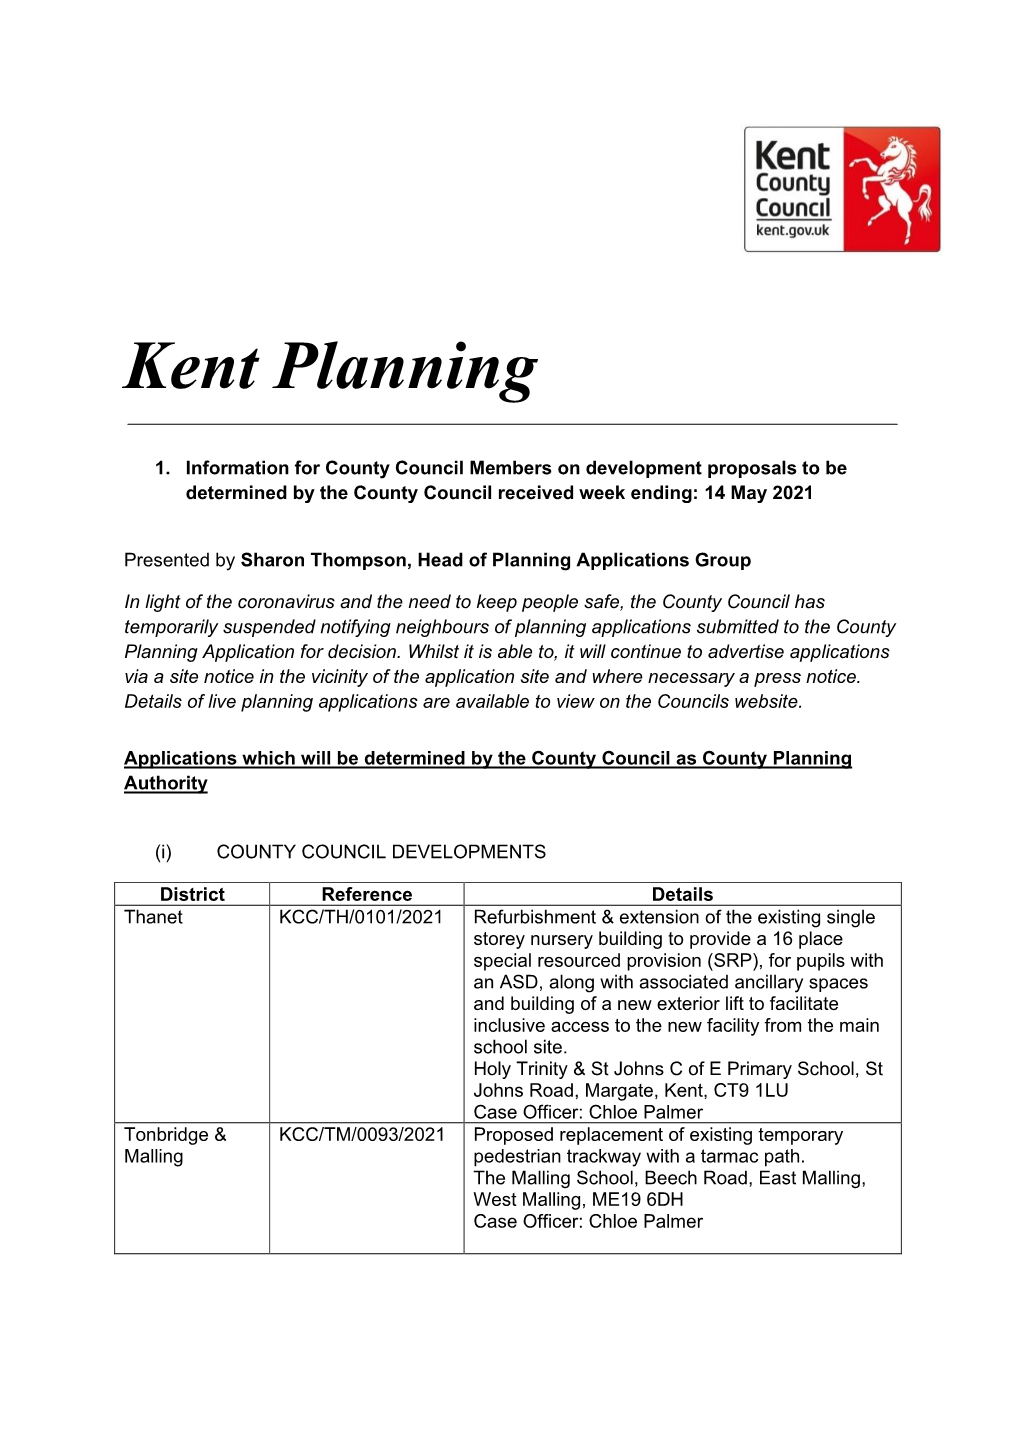 Kent Planning Weekly List 14 May 2021